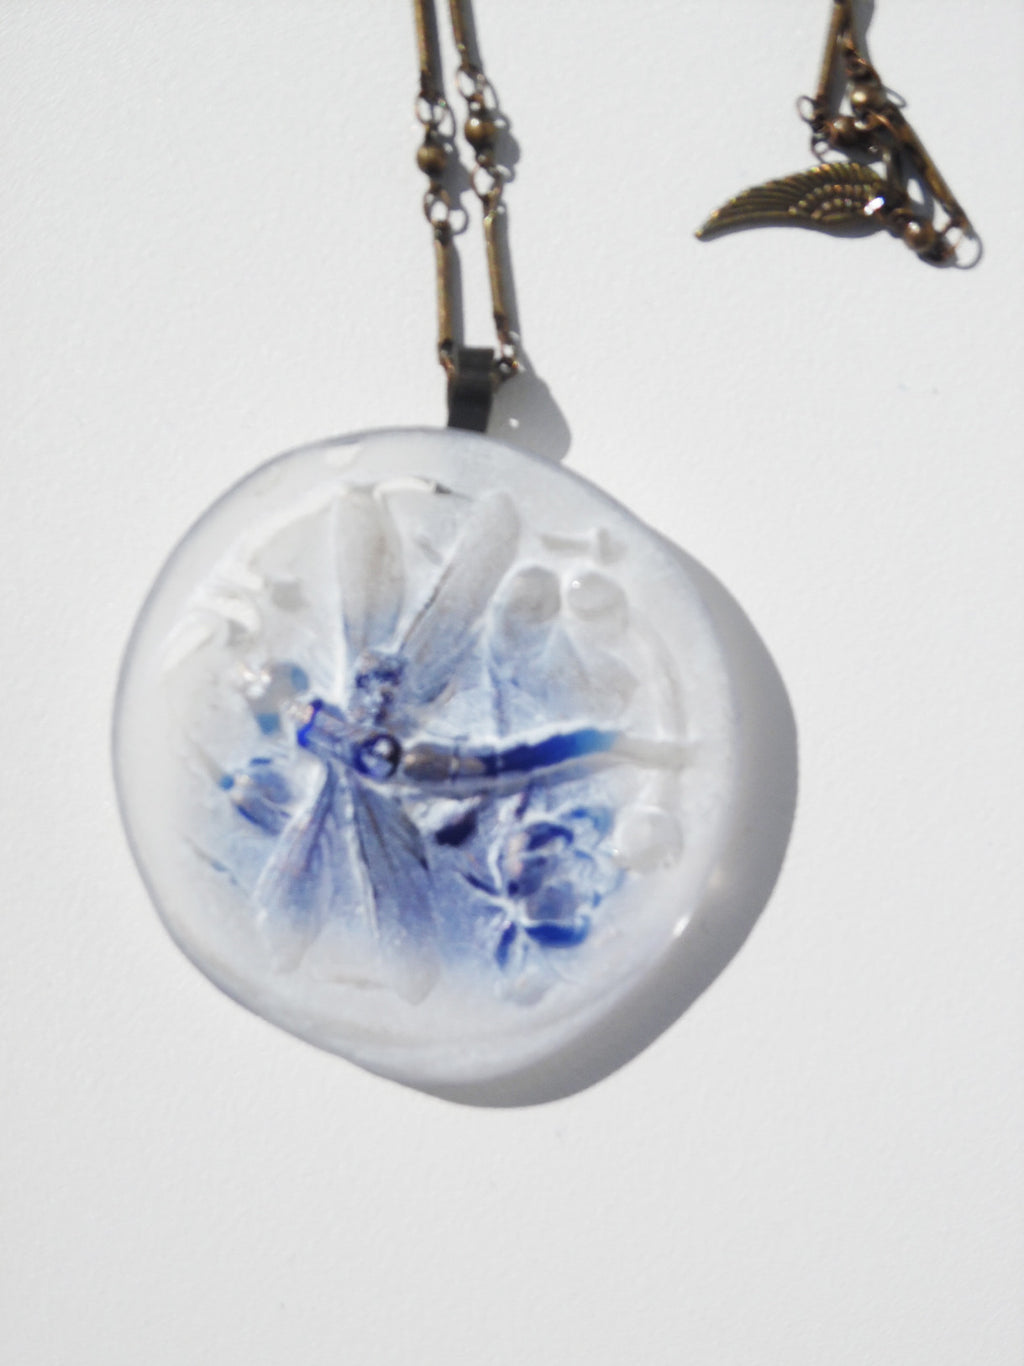 Necklace Hand Cast French Glass  Pendant Dragonfly Blue And White